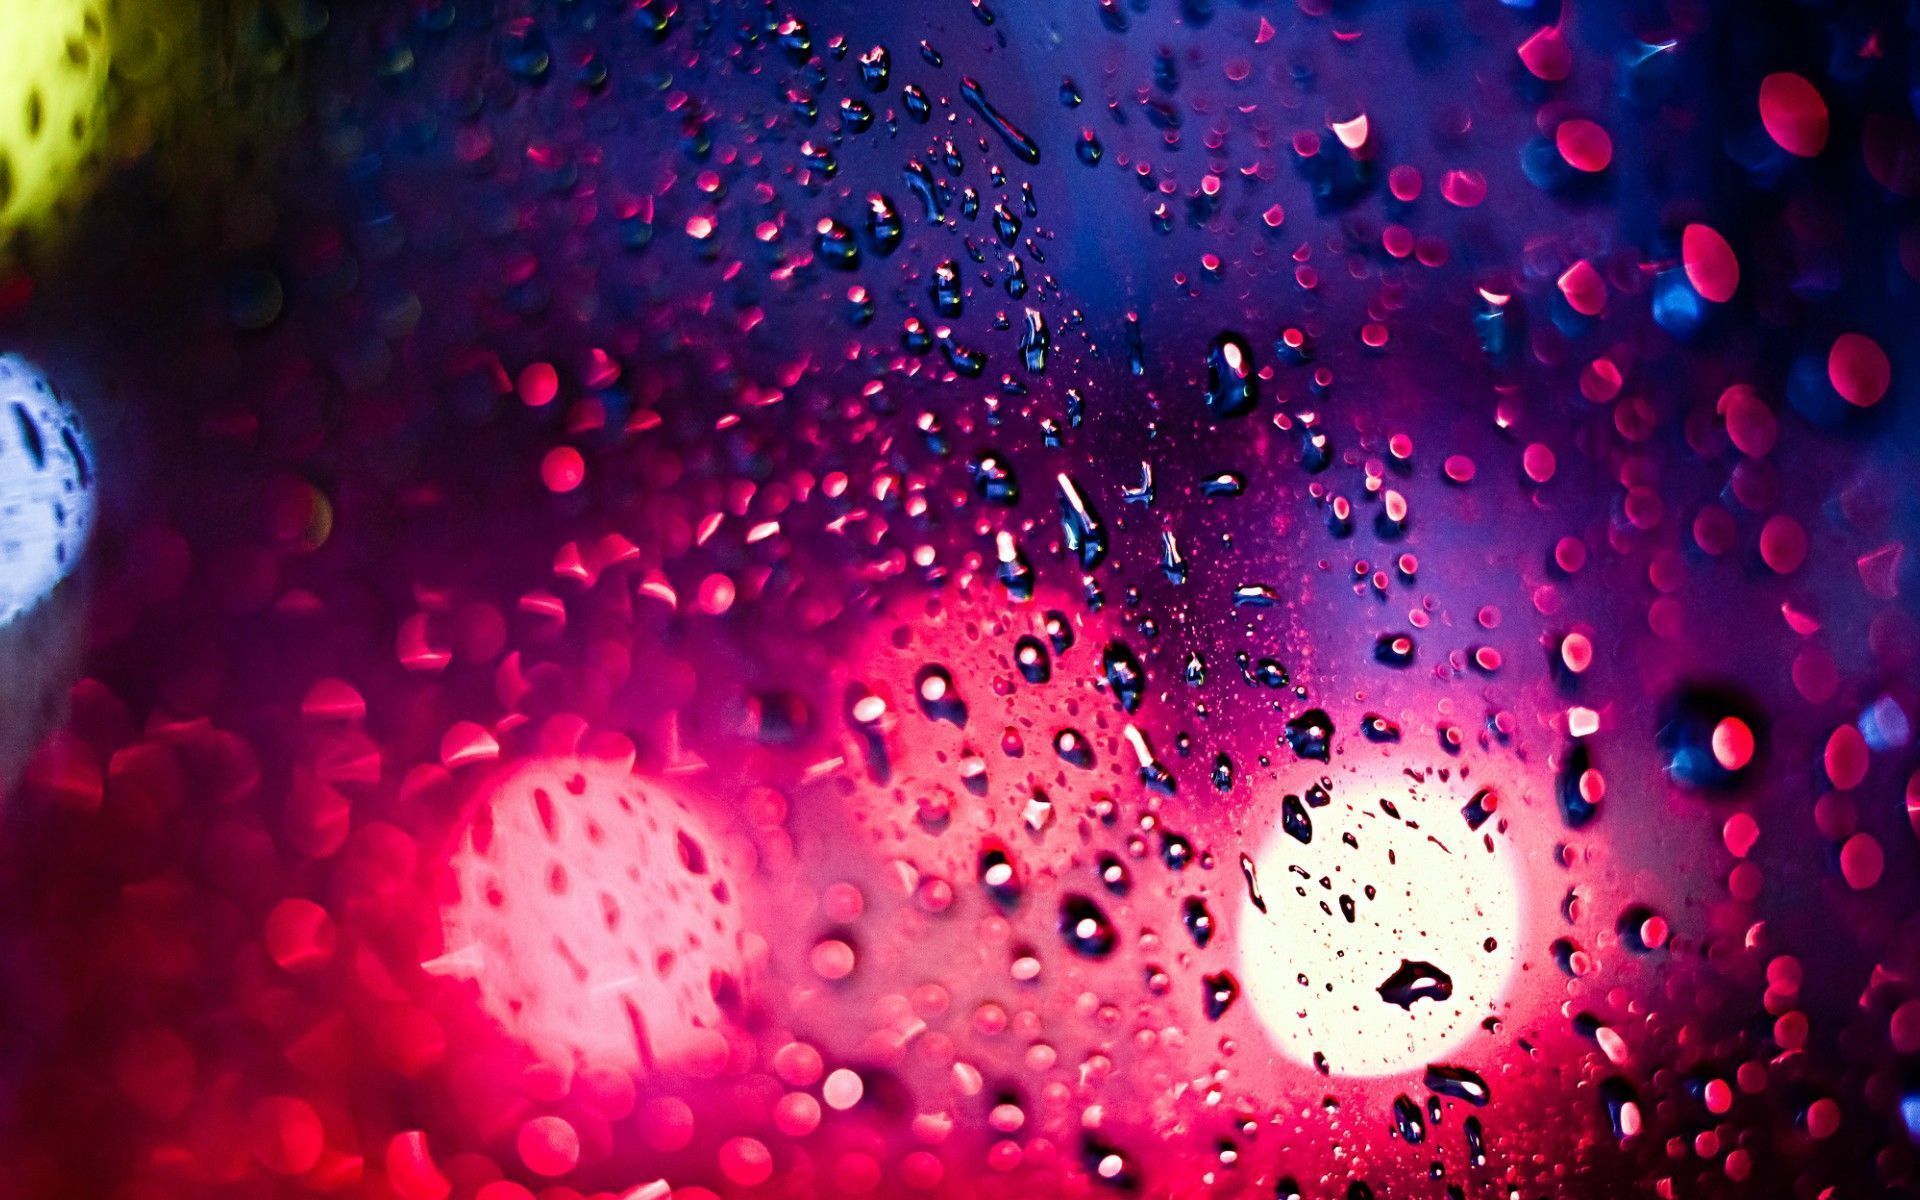 Rainy Lights Windows 8.1 / 10 Theme And Wallpapers All For Windows